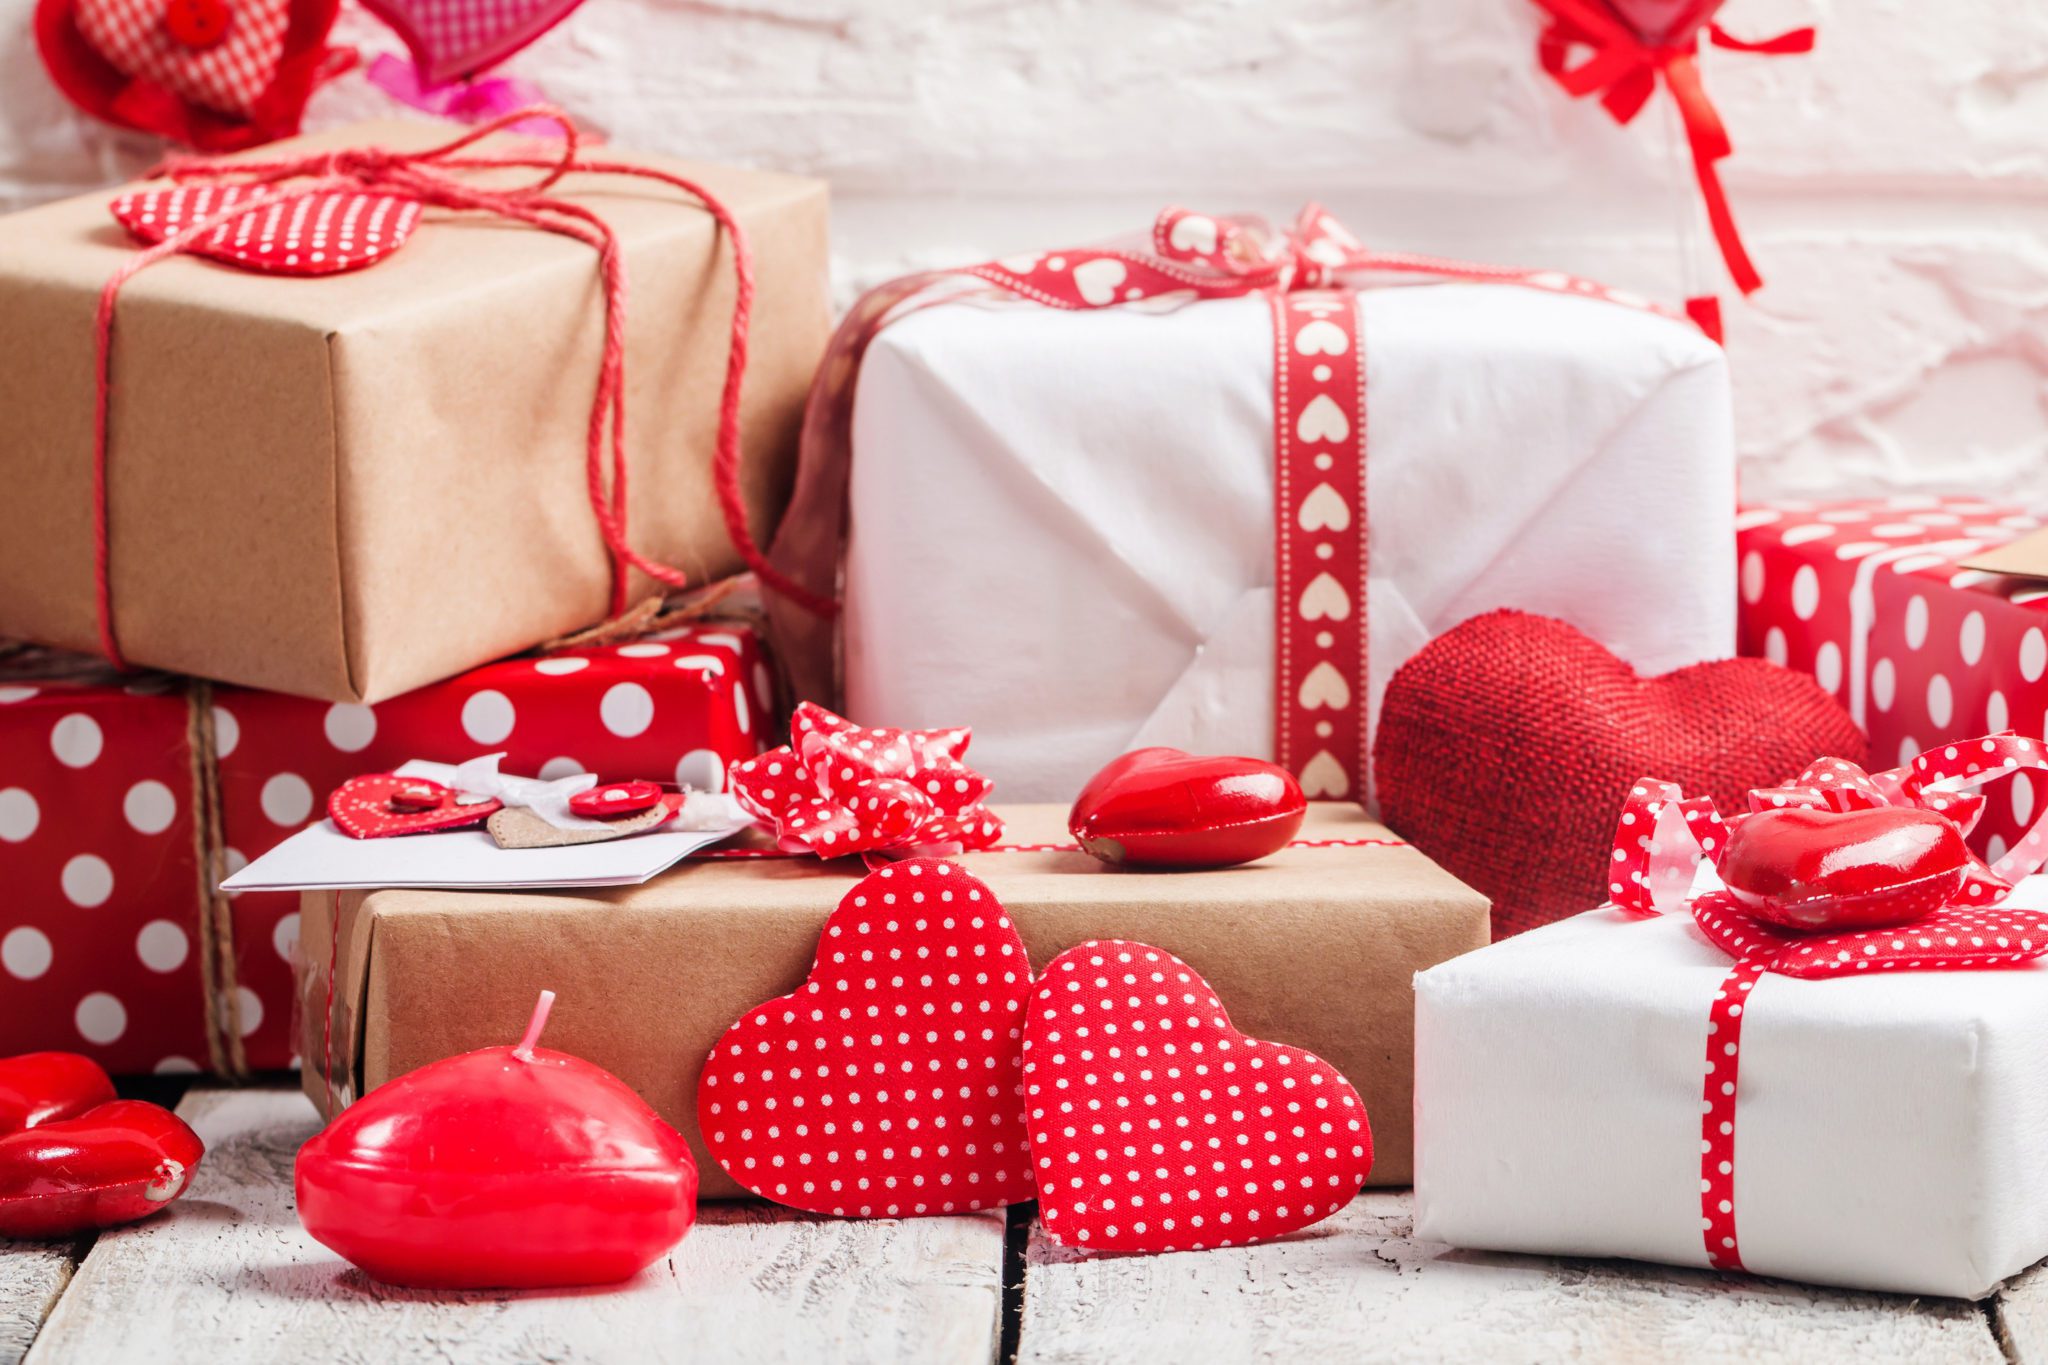 You are currently viewing 5 Affordable and Thoughtful Gift Ideas for Valentine’s Day